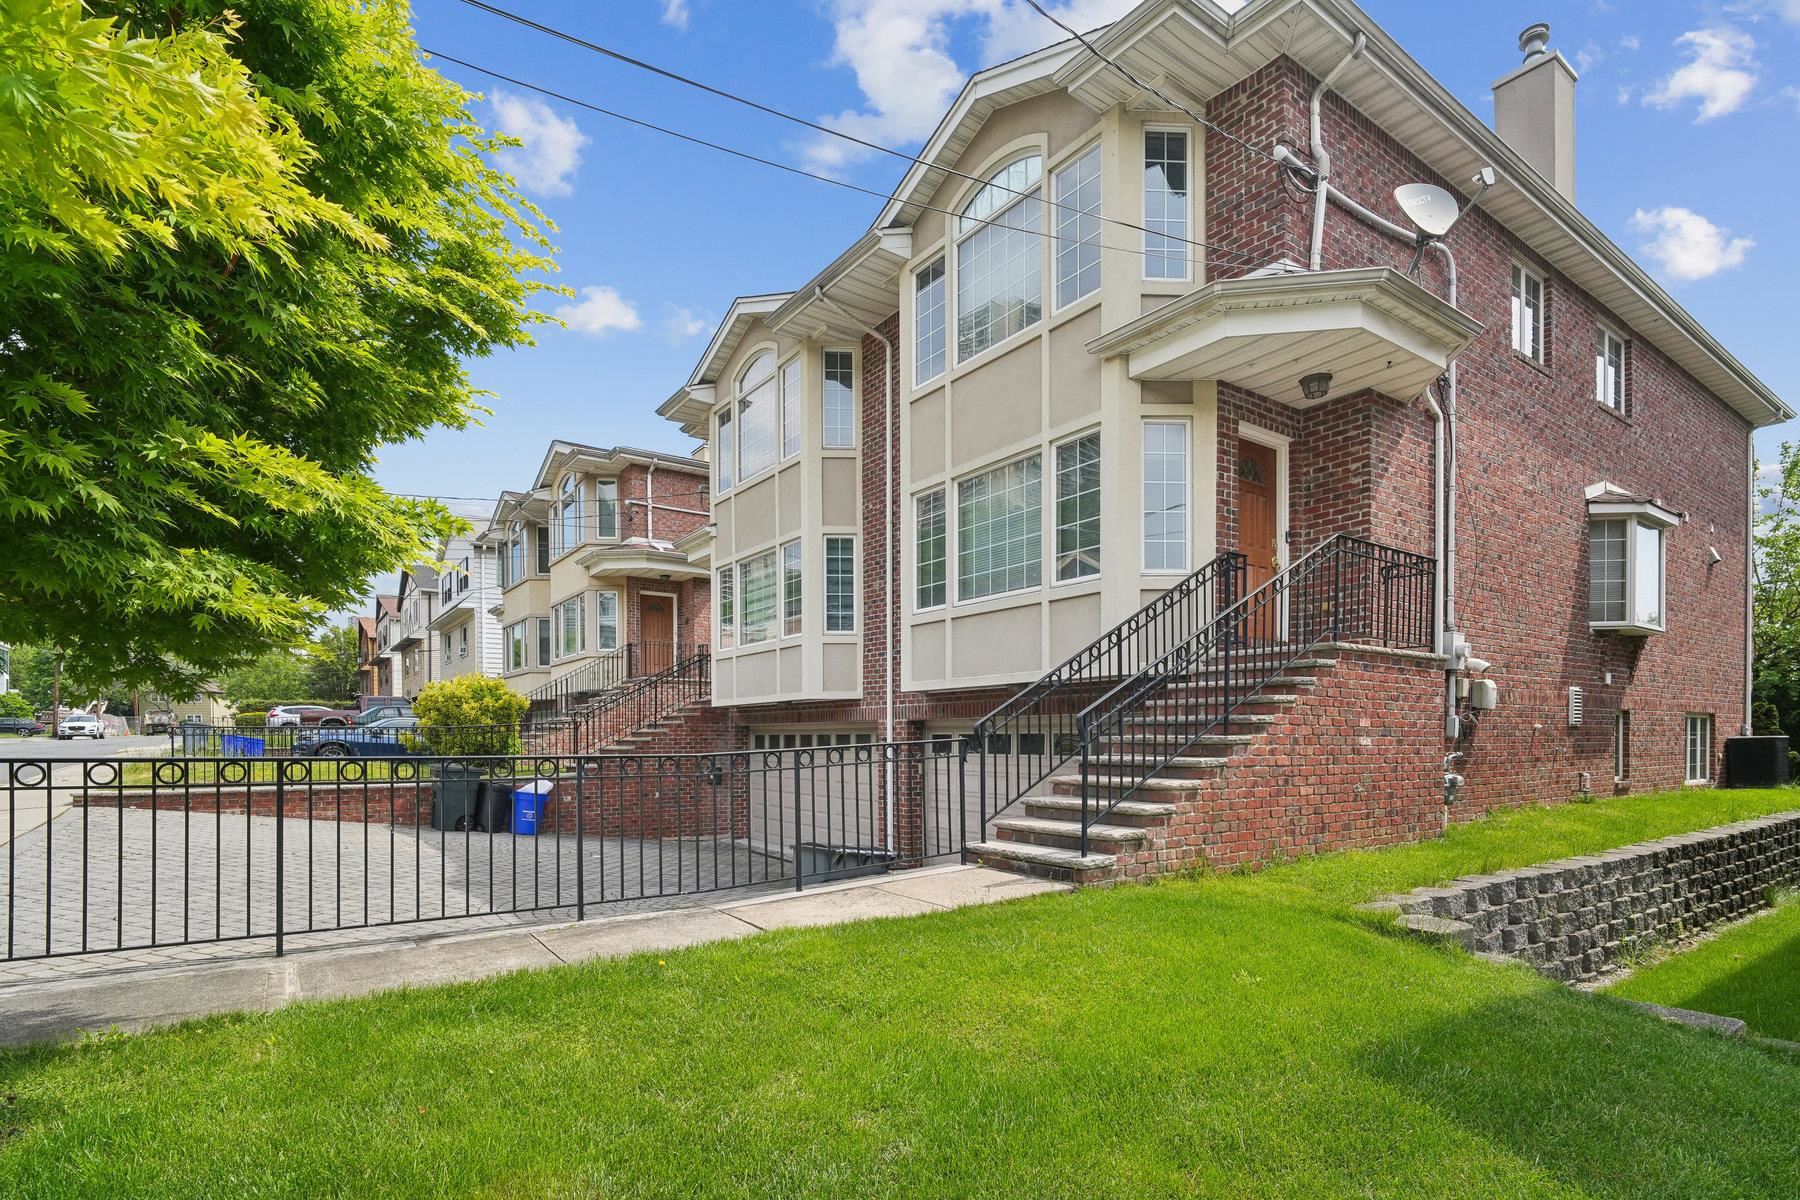 # 240009348 - For Rent in Edgewater NJ